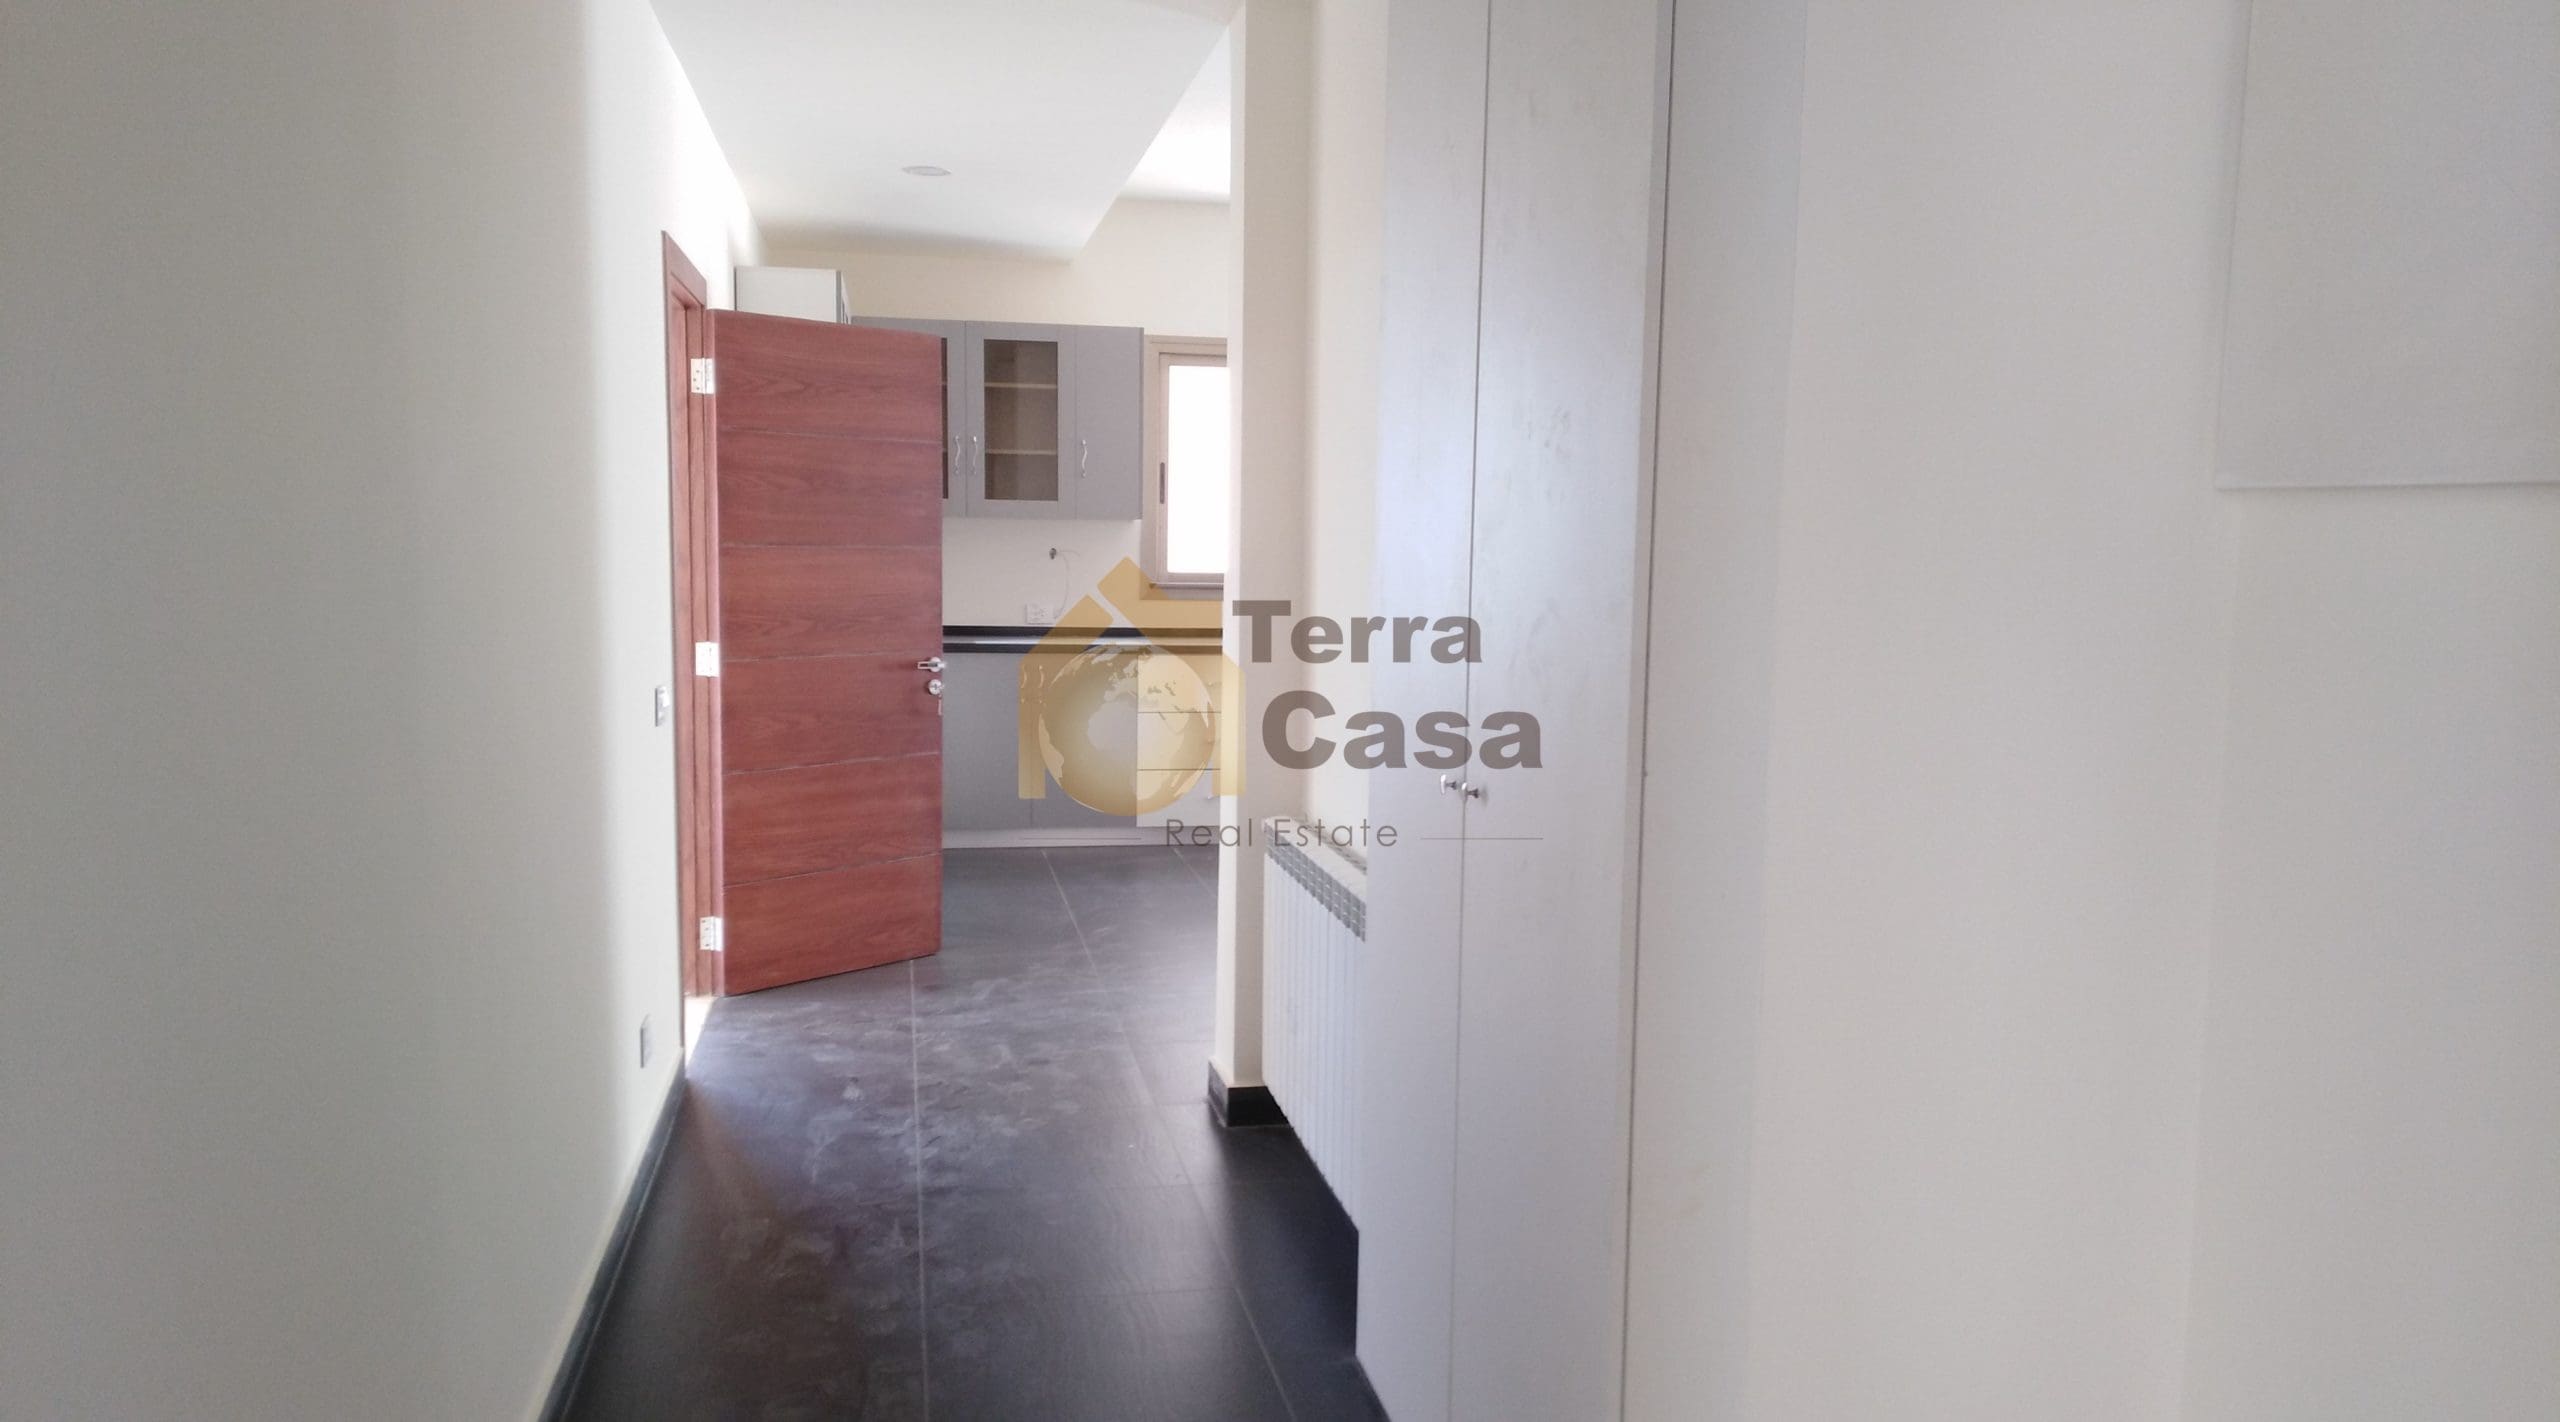 apartment for sale in Yarzeh brand new luxurious with 150 sqm terrace.